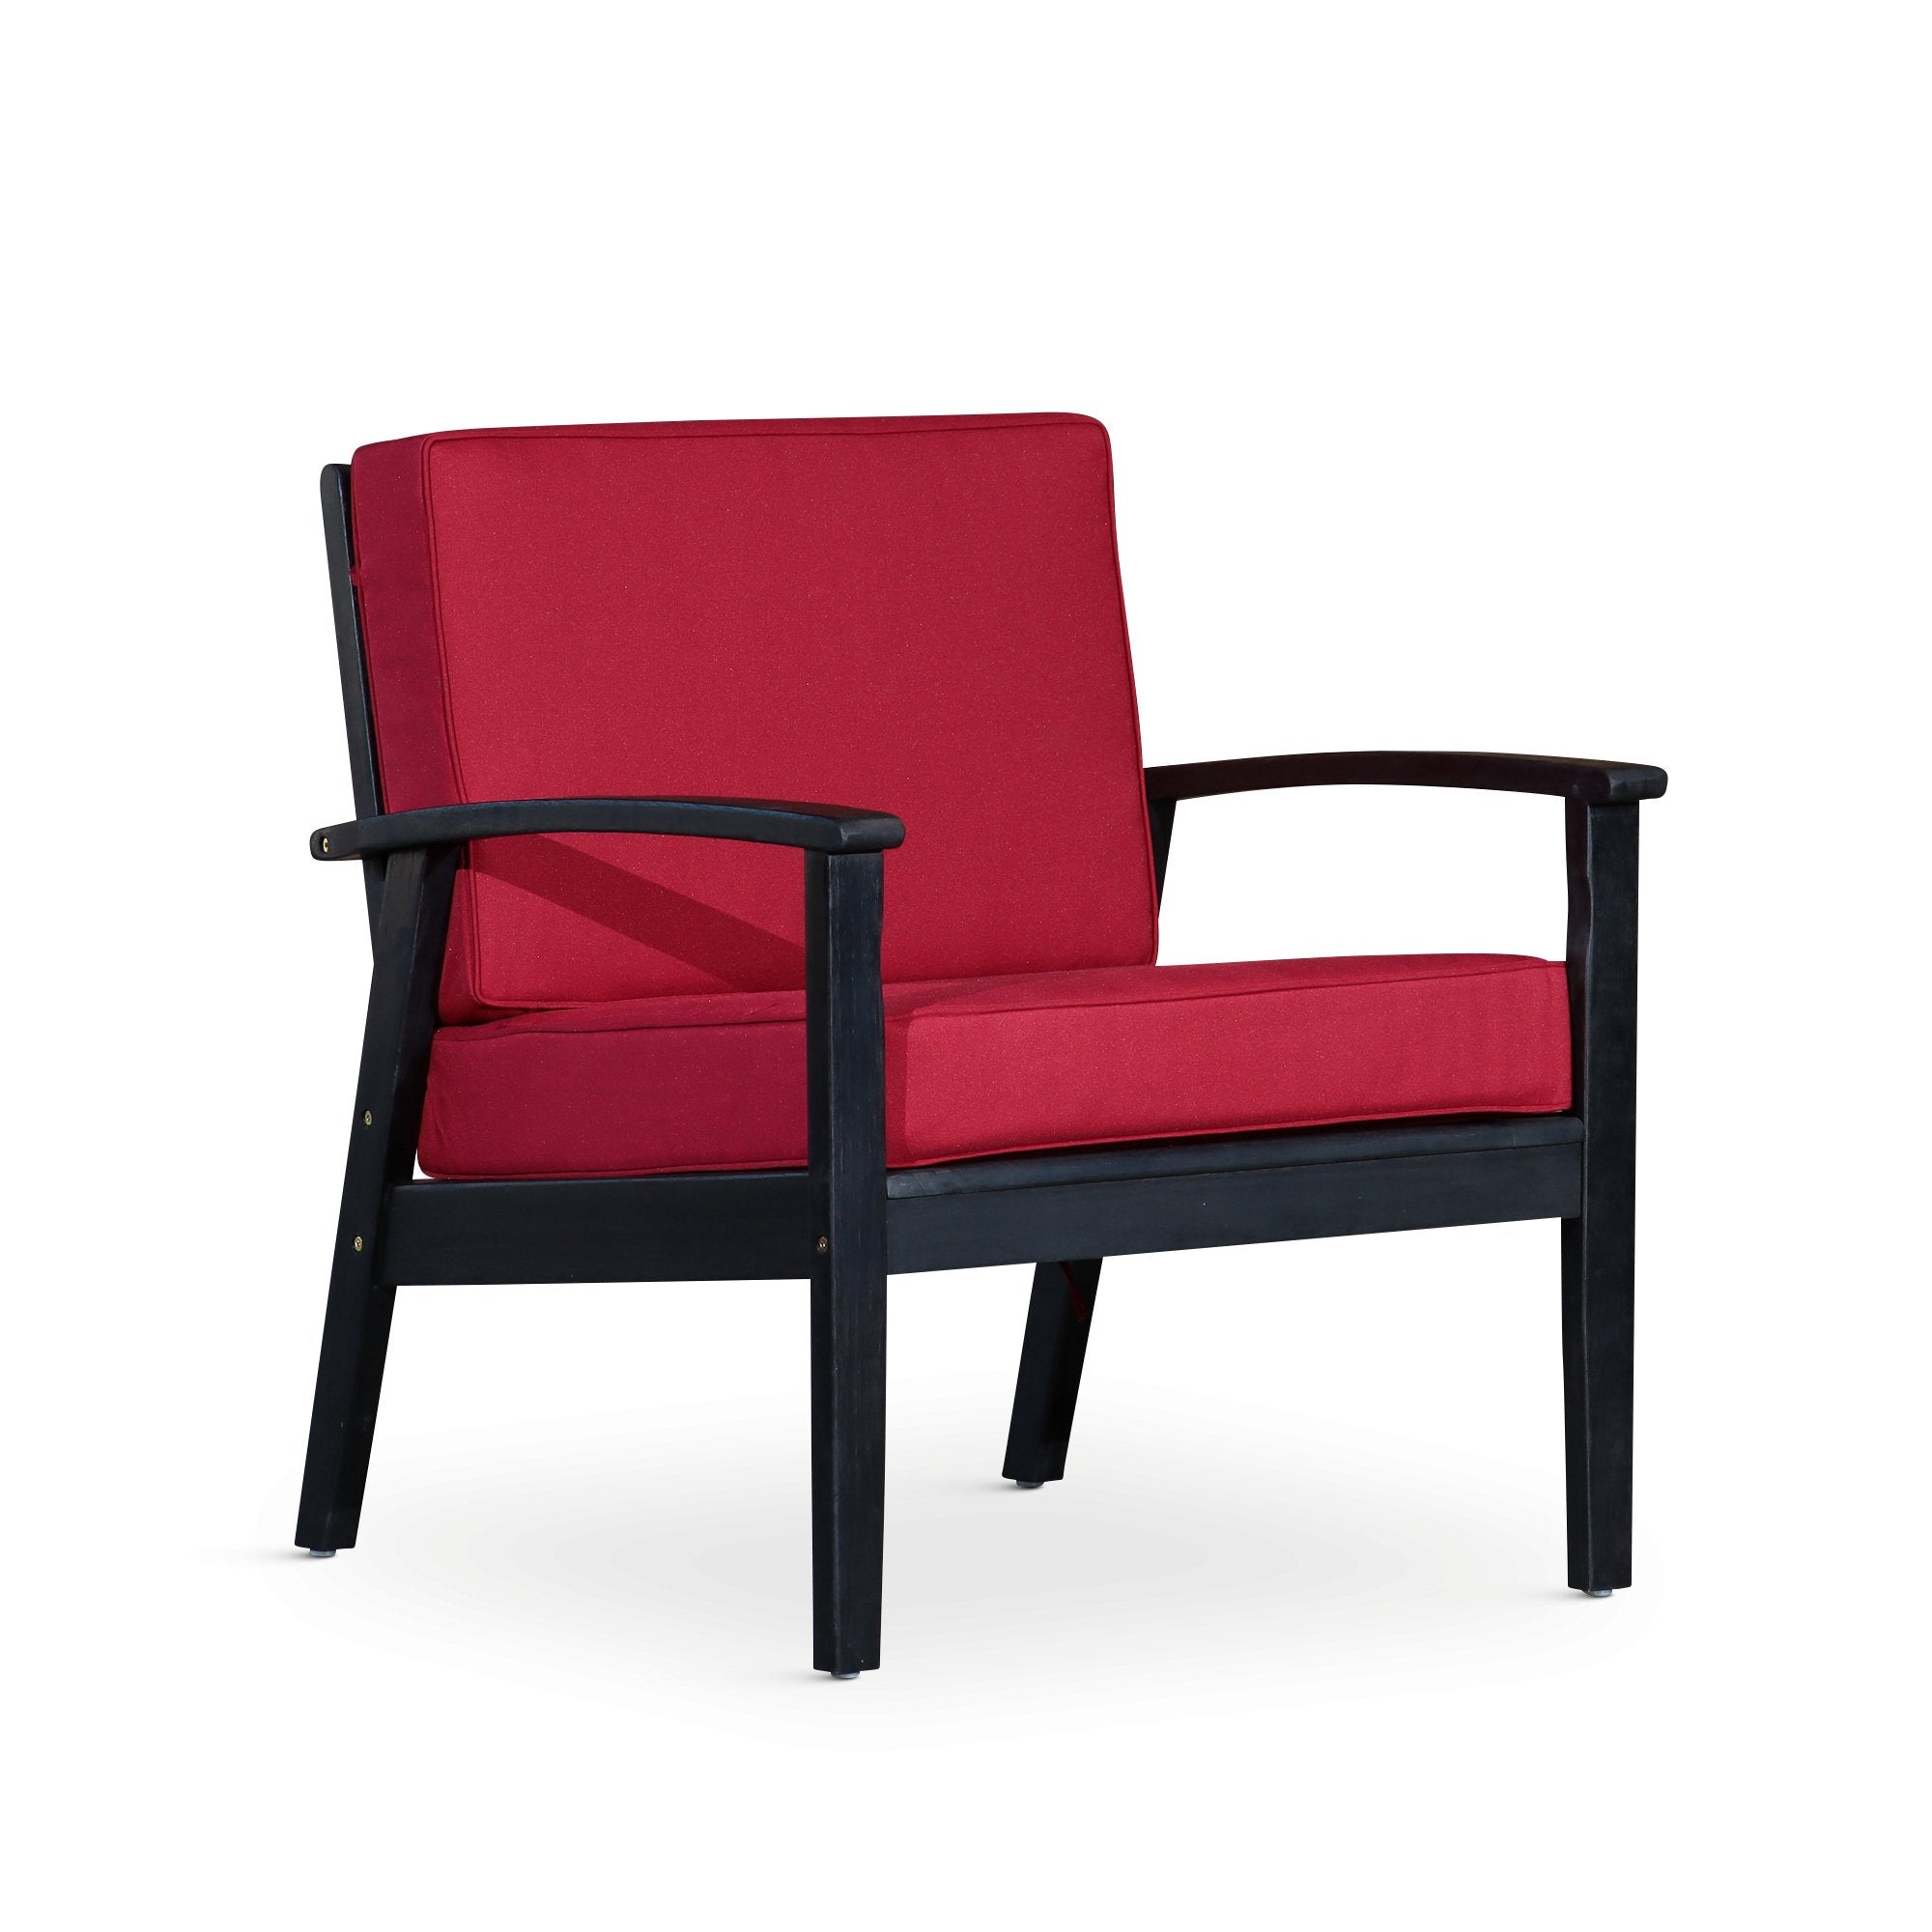 Deep-Seat-Outdoor-Chair,-Espresso-Finish,-Burgundy-Cushions-Outdoor-Chairs